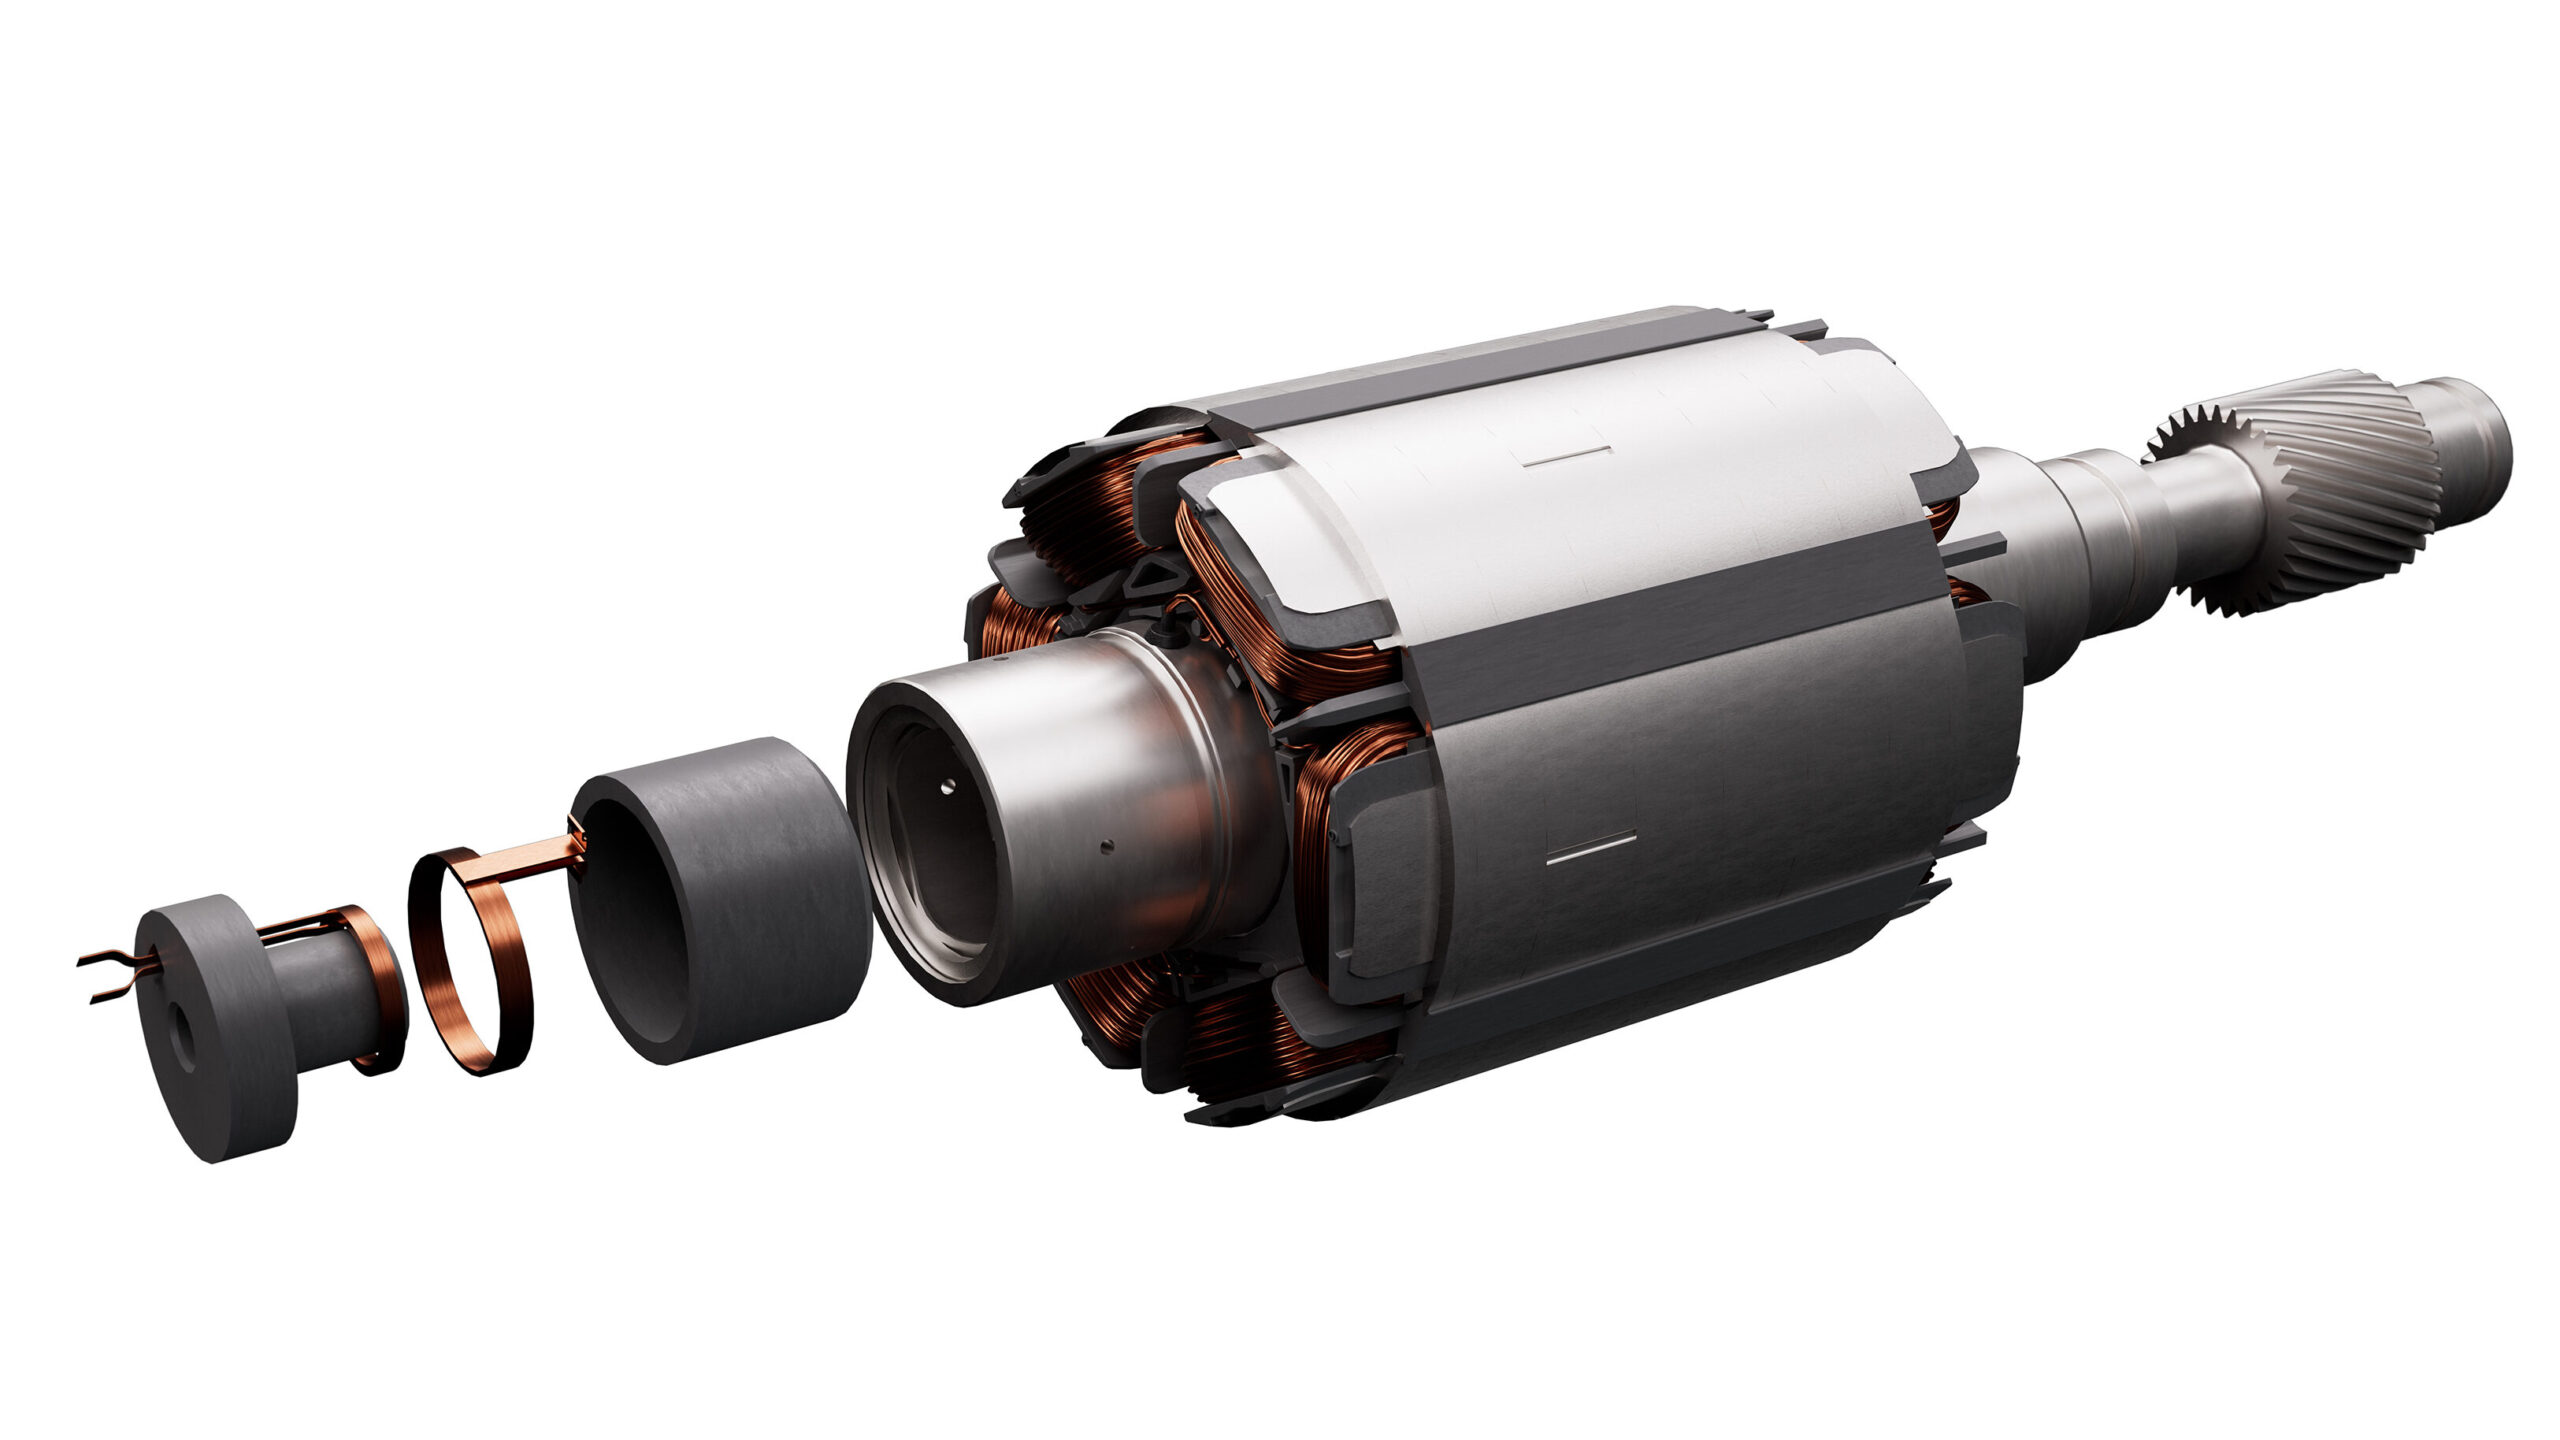 ZF magnet-free In-Rotor Inductive-Excited Synchronous Motor (I2SM)